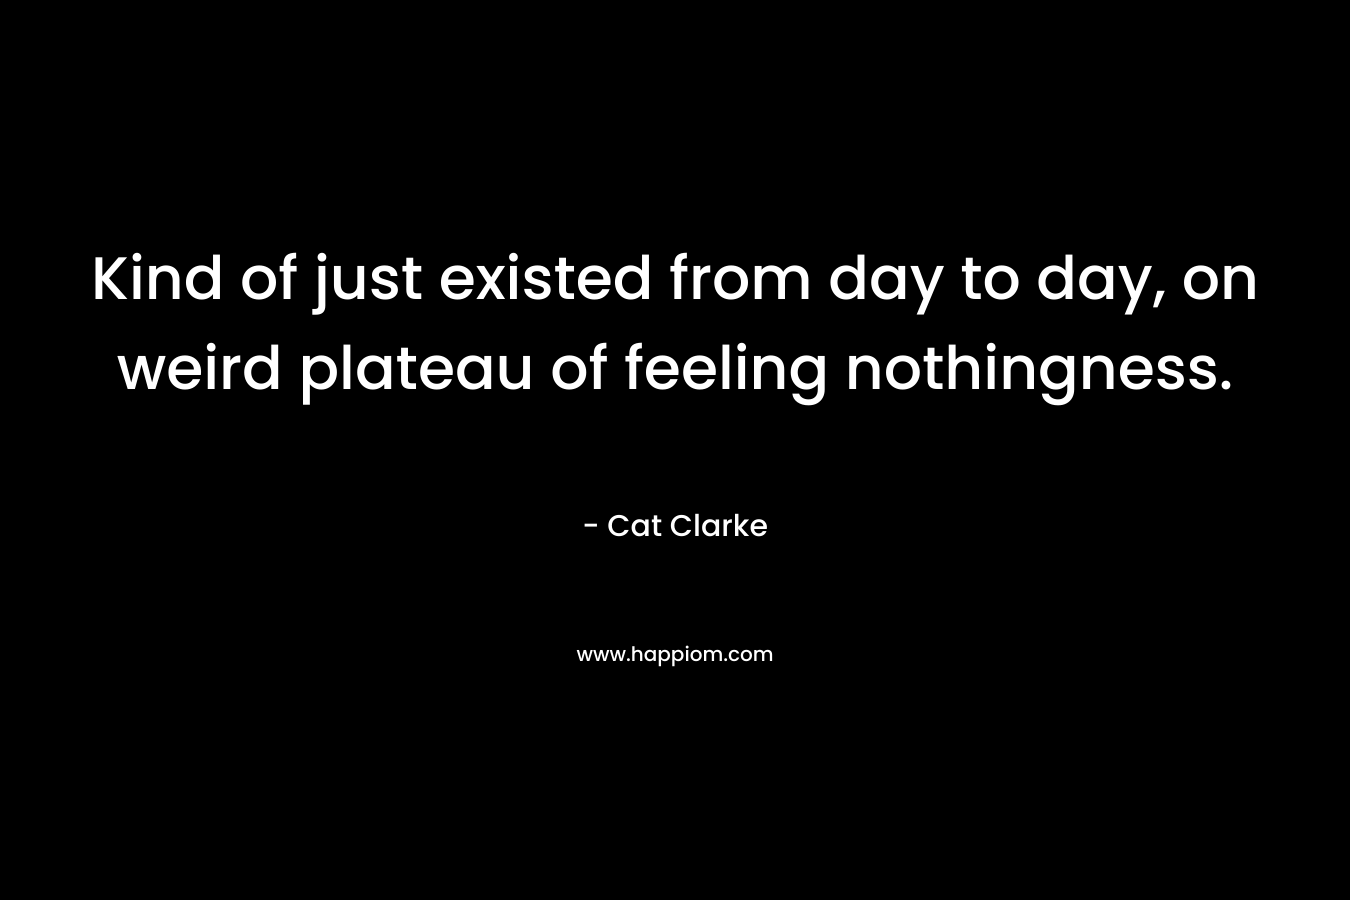 Kind of just existed from day to day, on weird plateau of feeling nothingness. – Cat Clarke